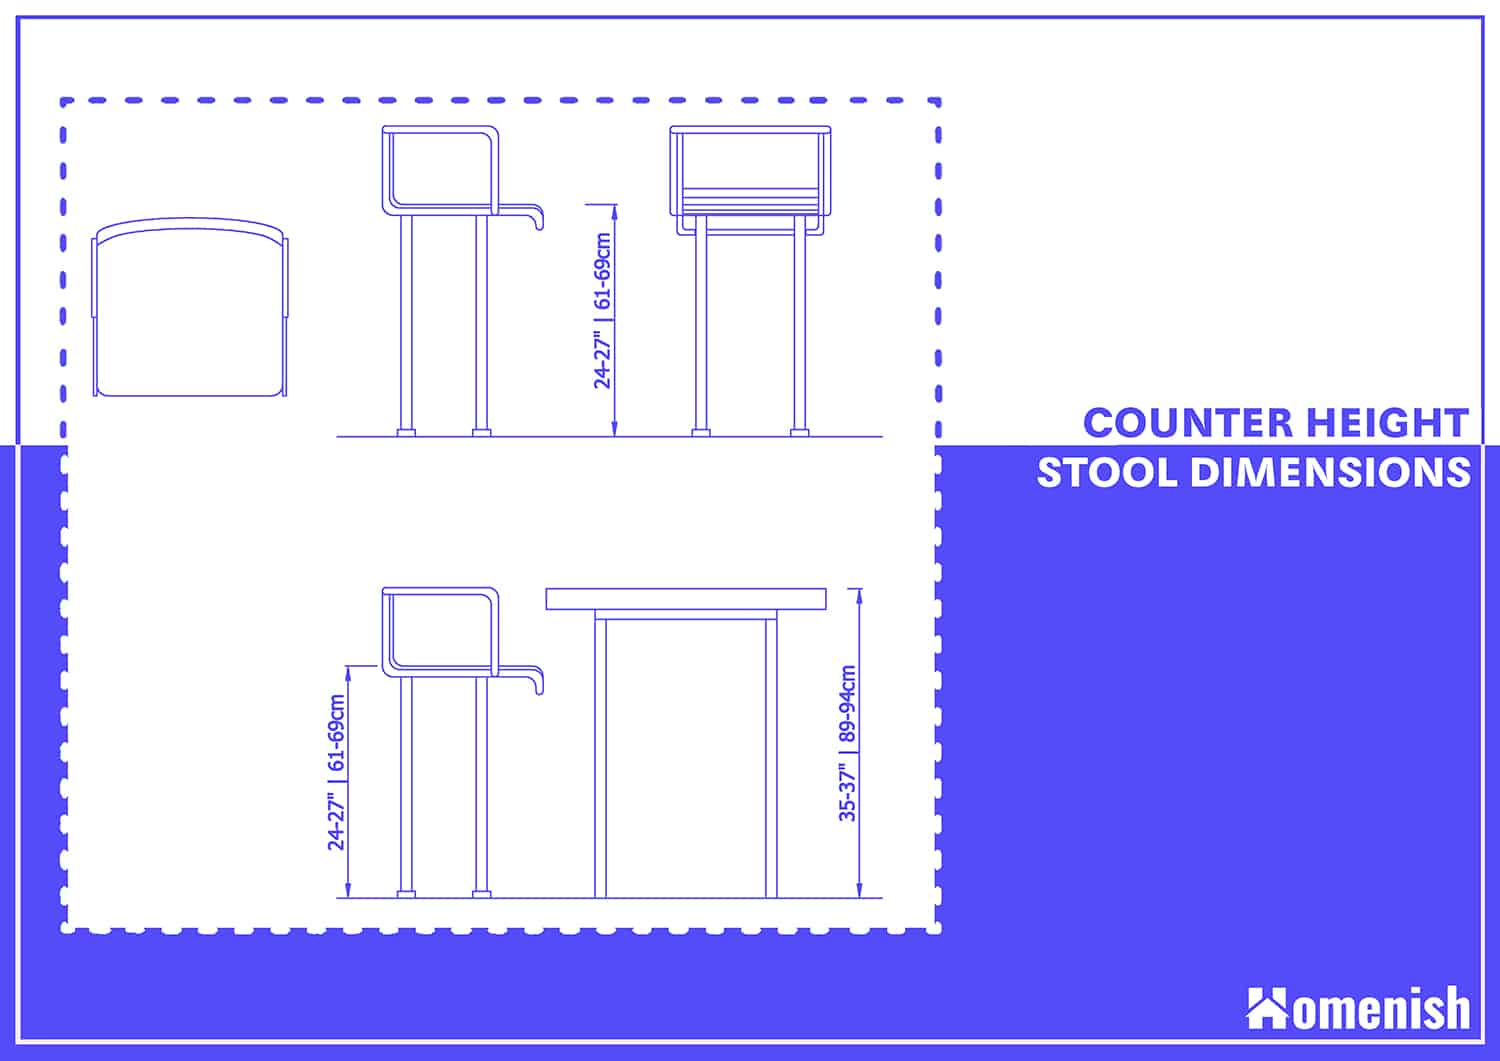 Counter Height Stool Dimensions